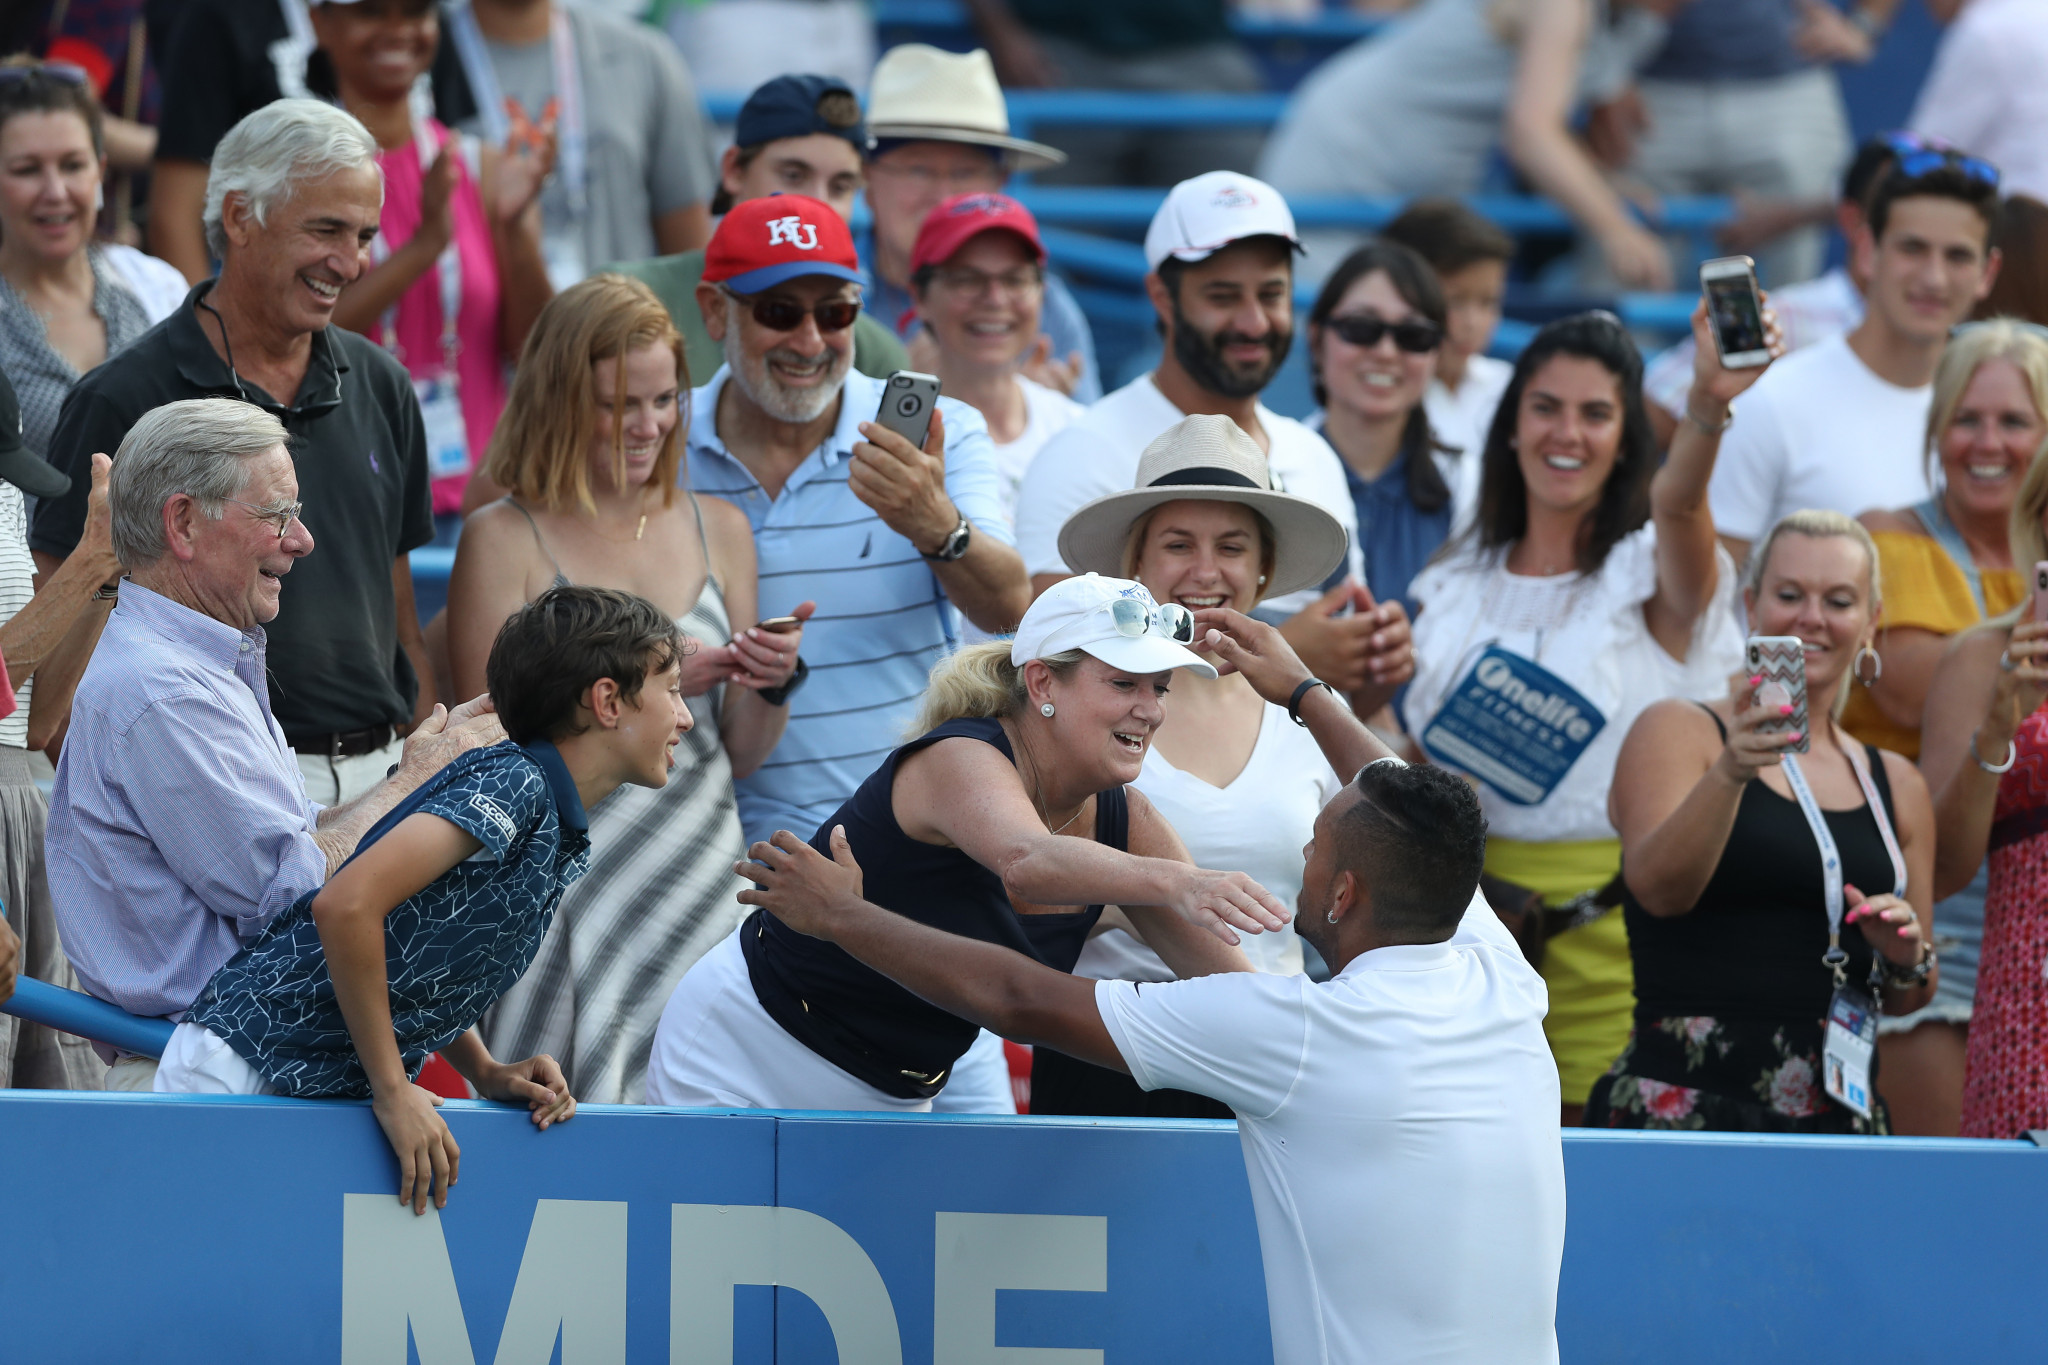 Nick Kyrgios asked a fan where he should serve his match-point in the final of the Washington Open, thanking her after her suggestion won him the tournament ©Getty Images